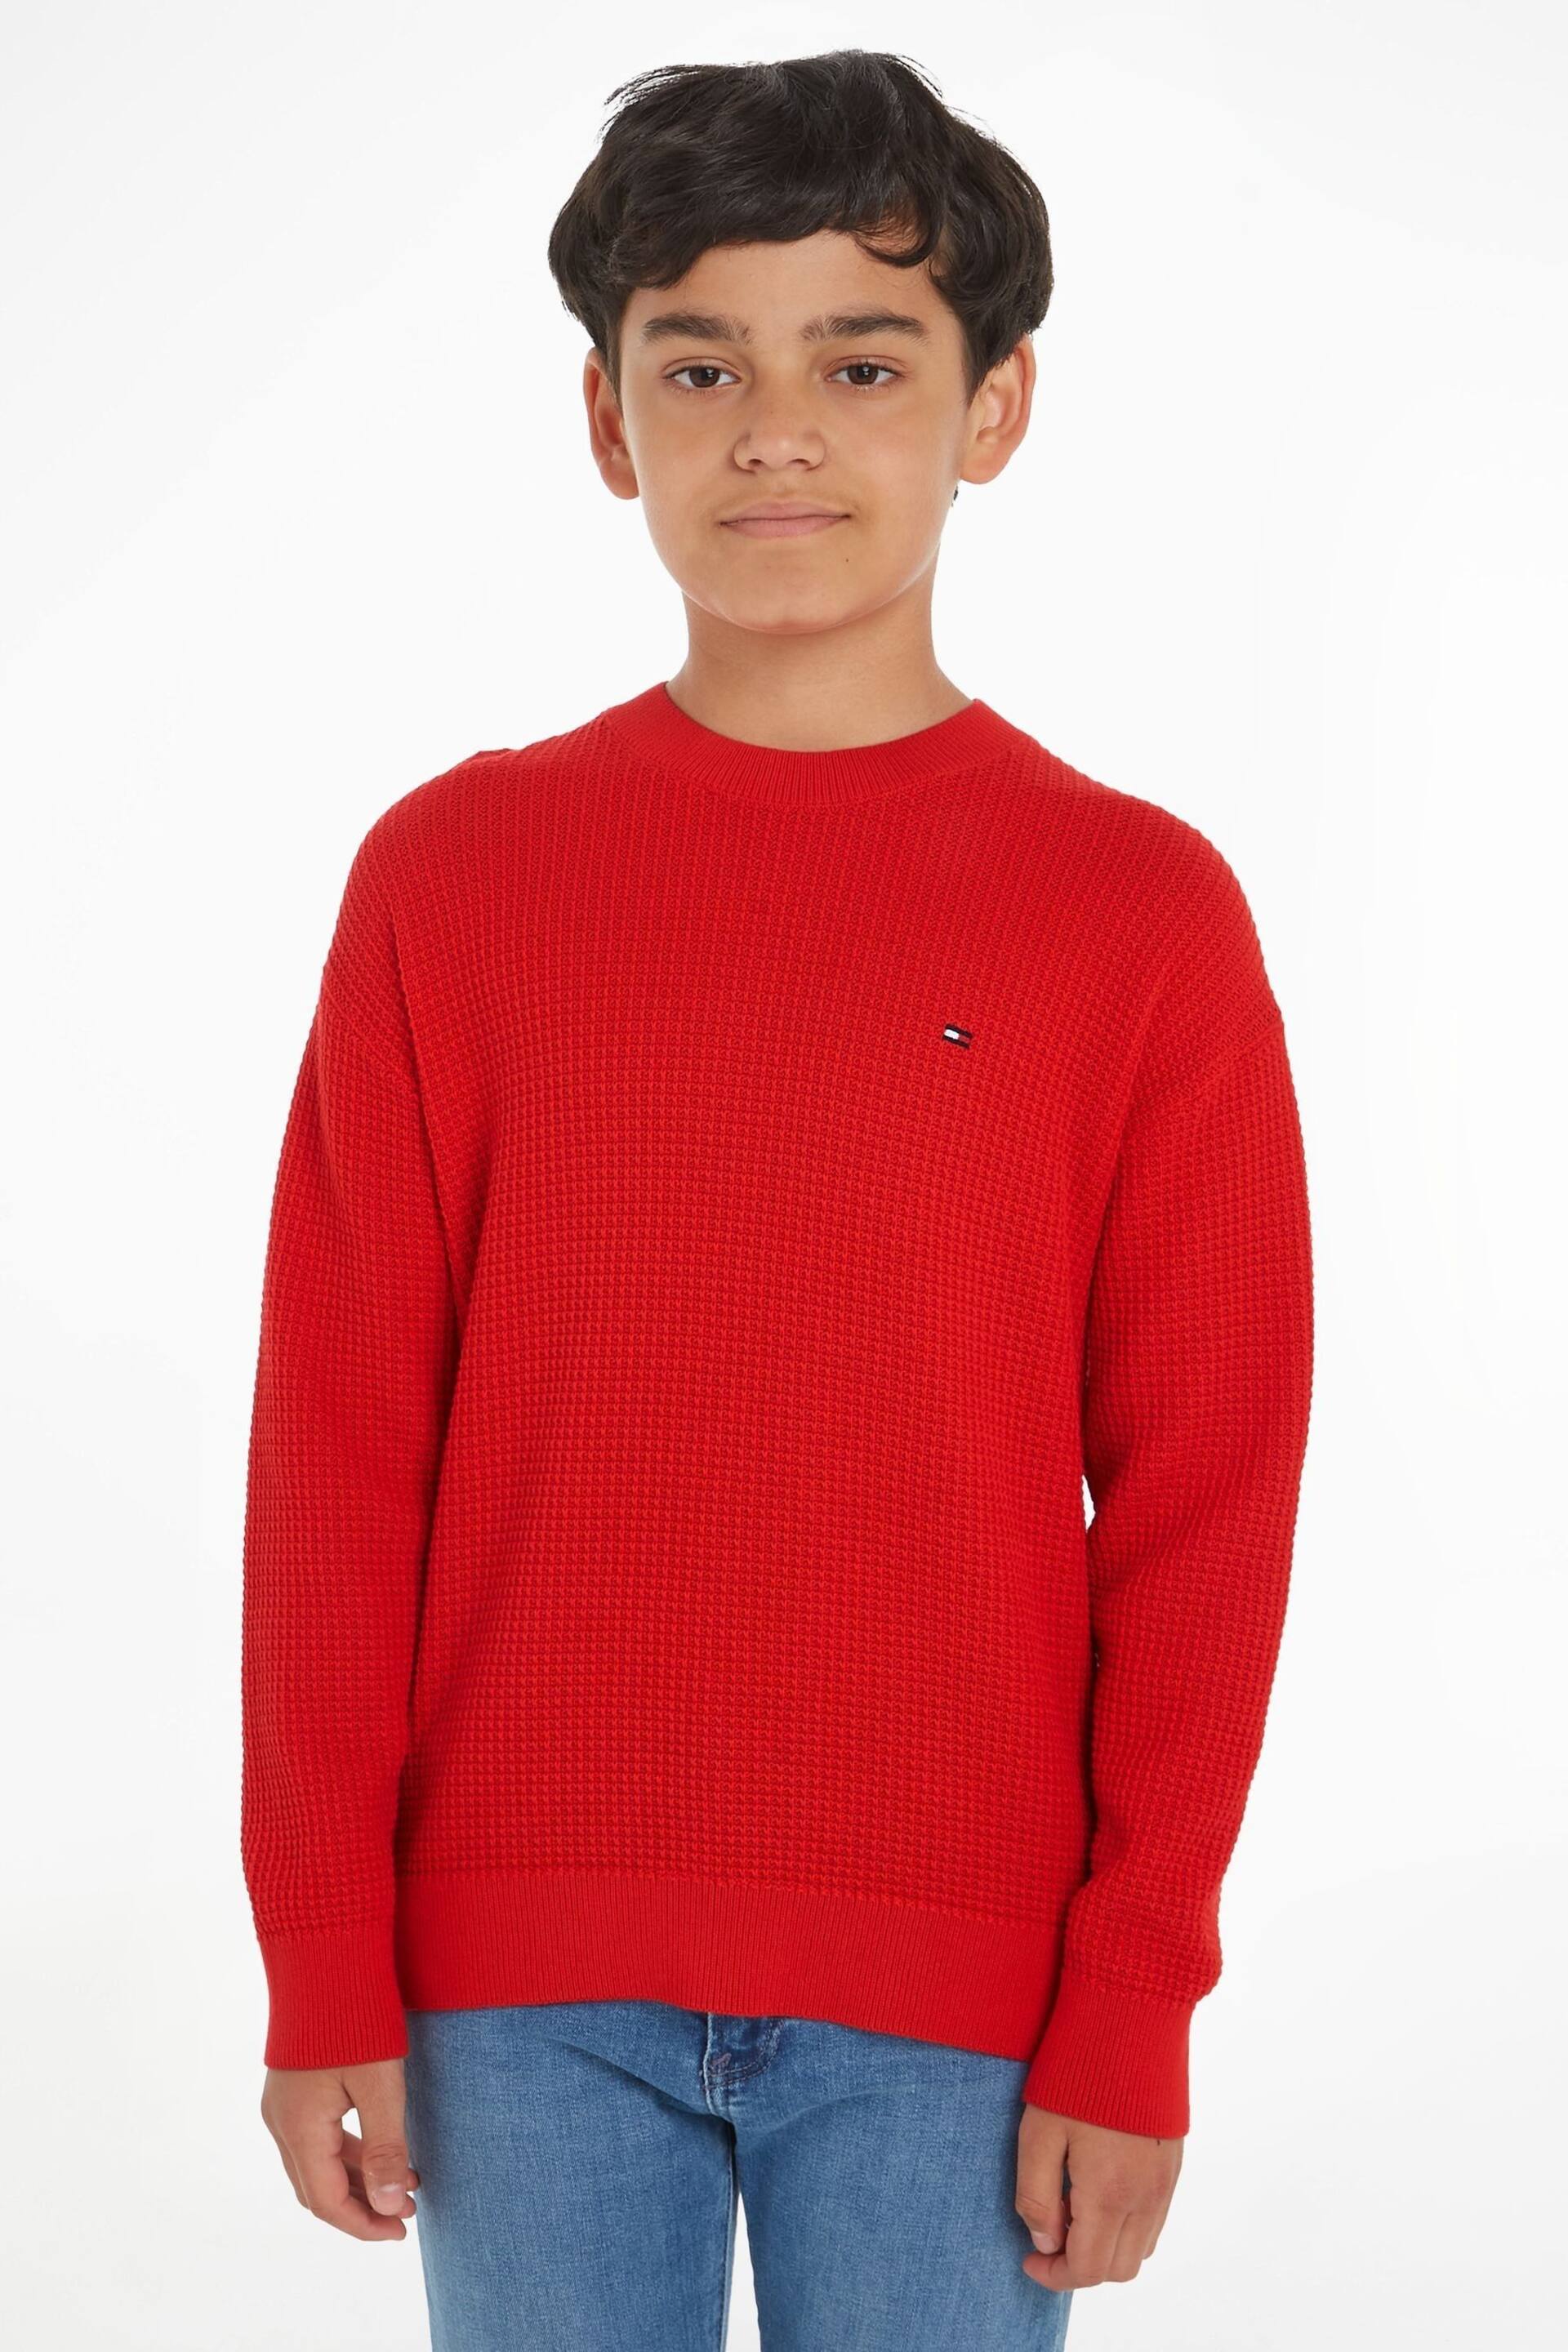 Tommy Hilfiger Essential Sweater - Image 1 of 6